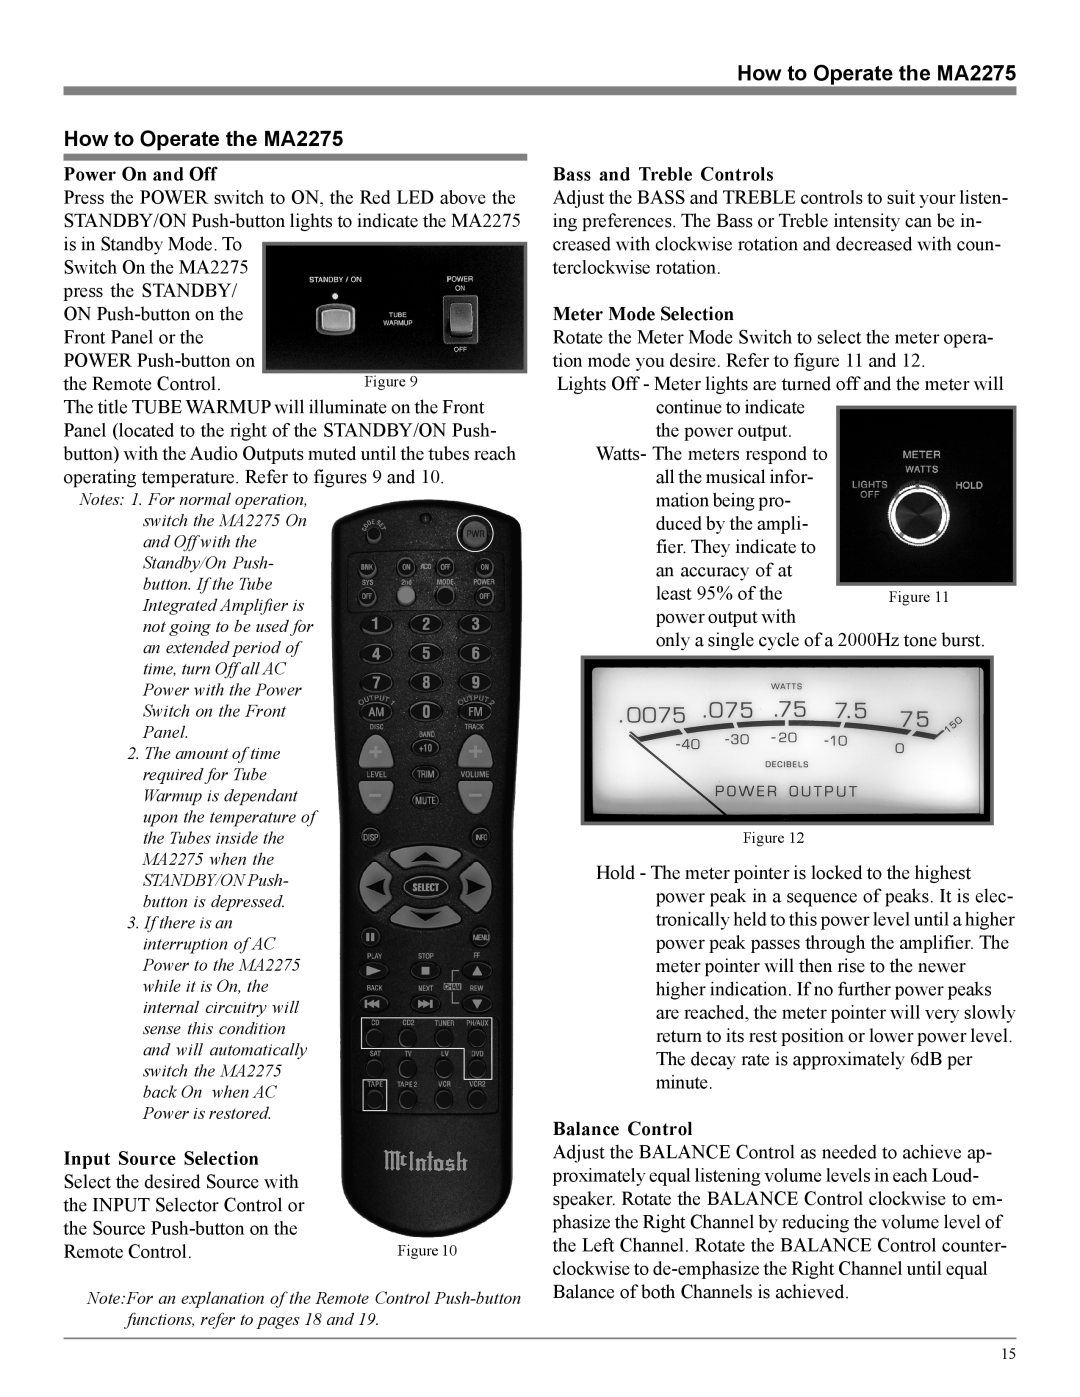 McIntosh owner manual How to Operate the MA2275, Input Source Selection, Select the desired Source with, Remote Control 